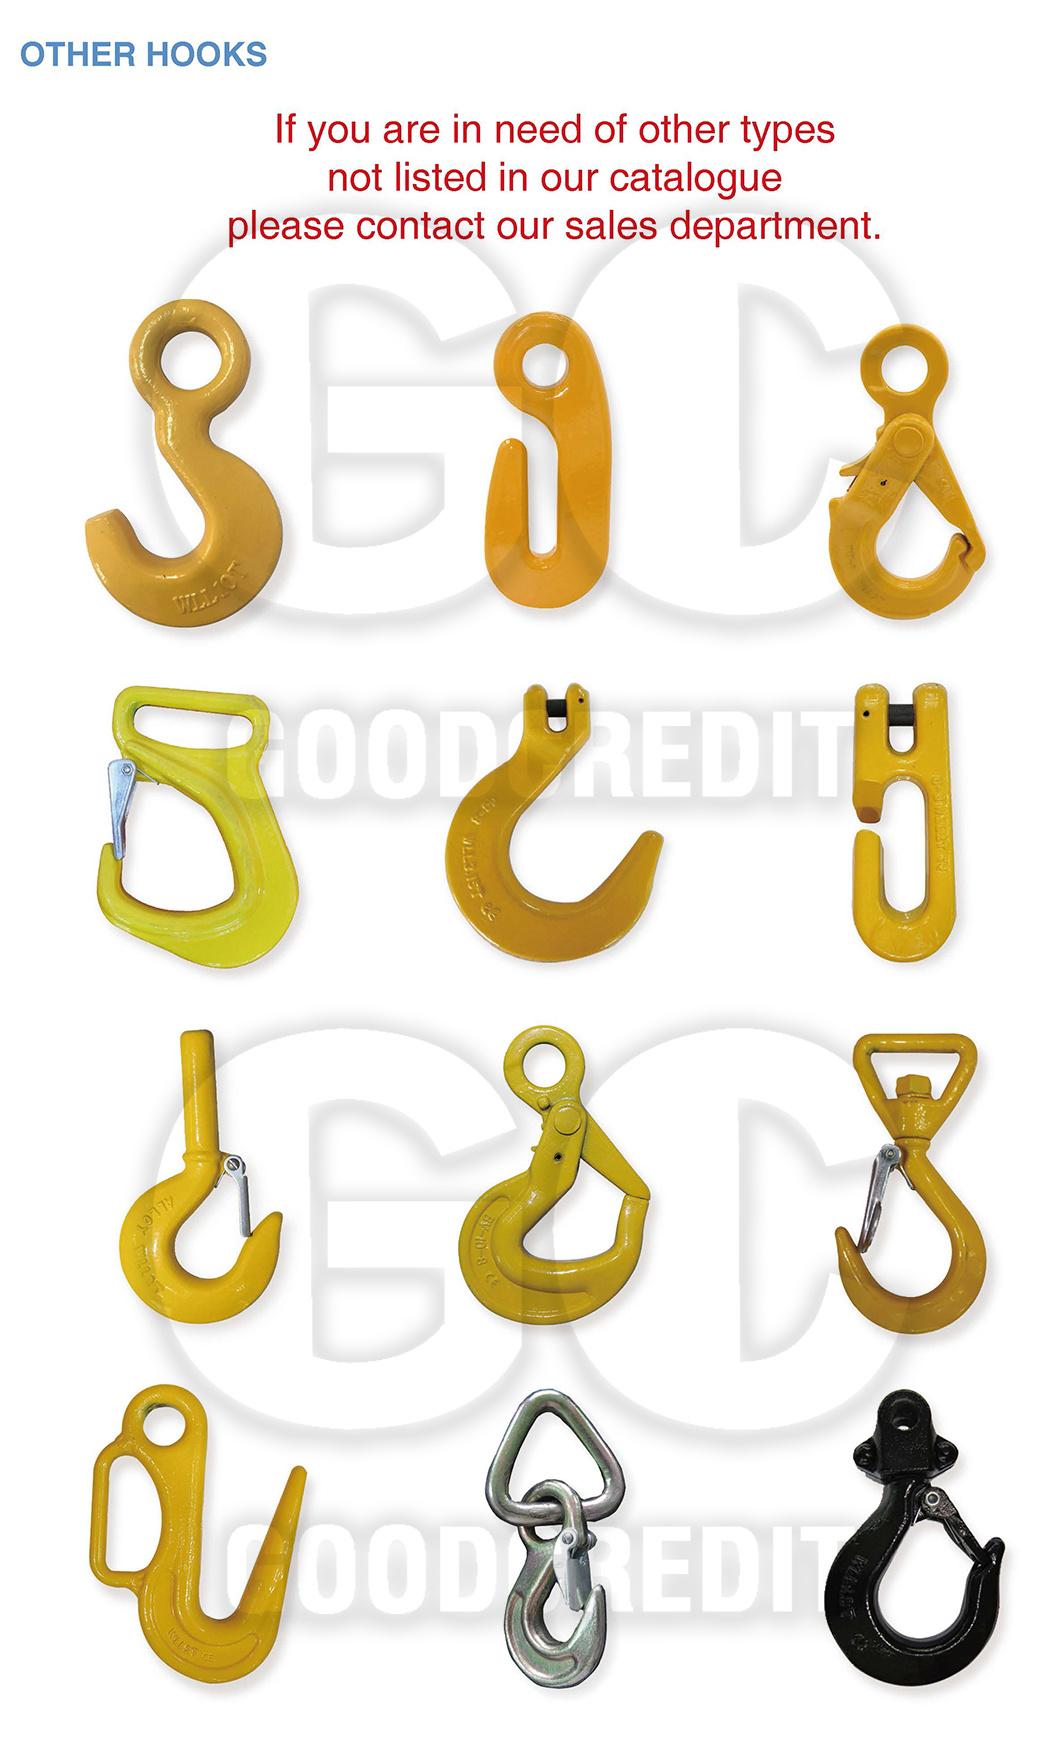 Forged Alloy Steel G70 Clevis Grab Hook Safety Type